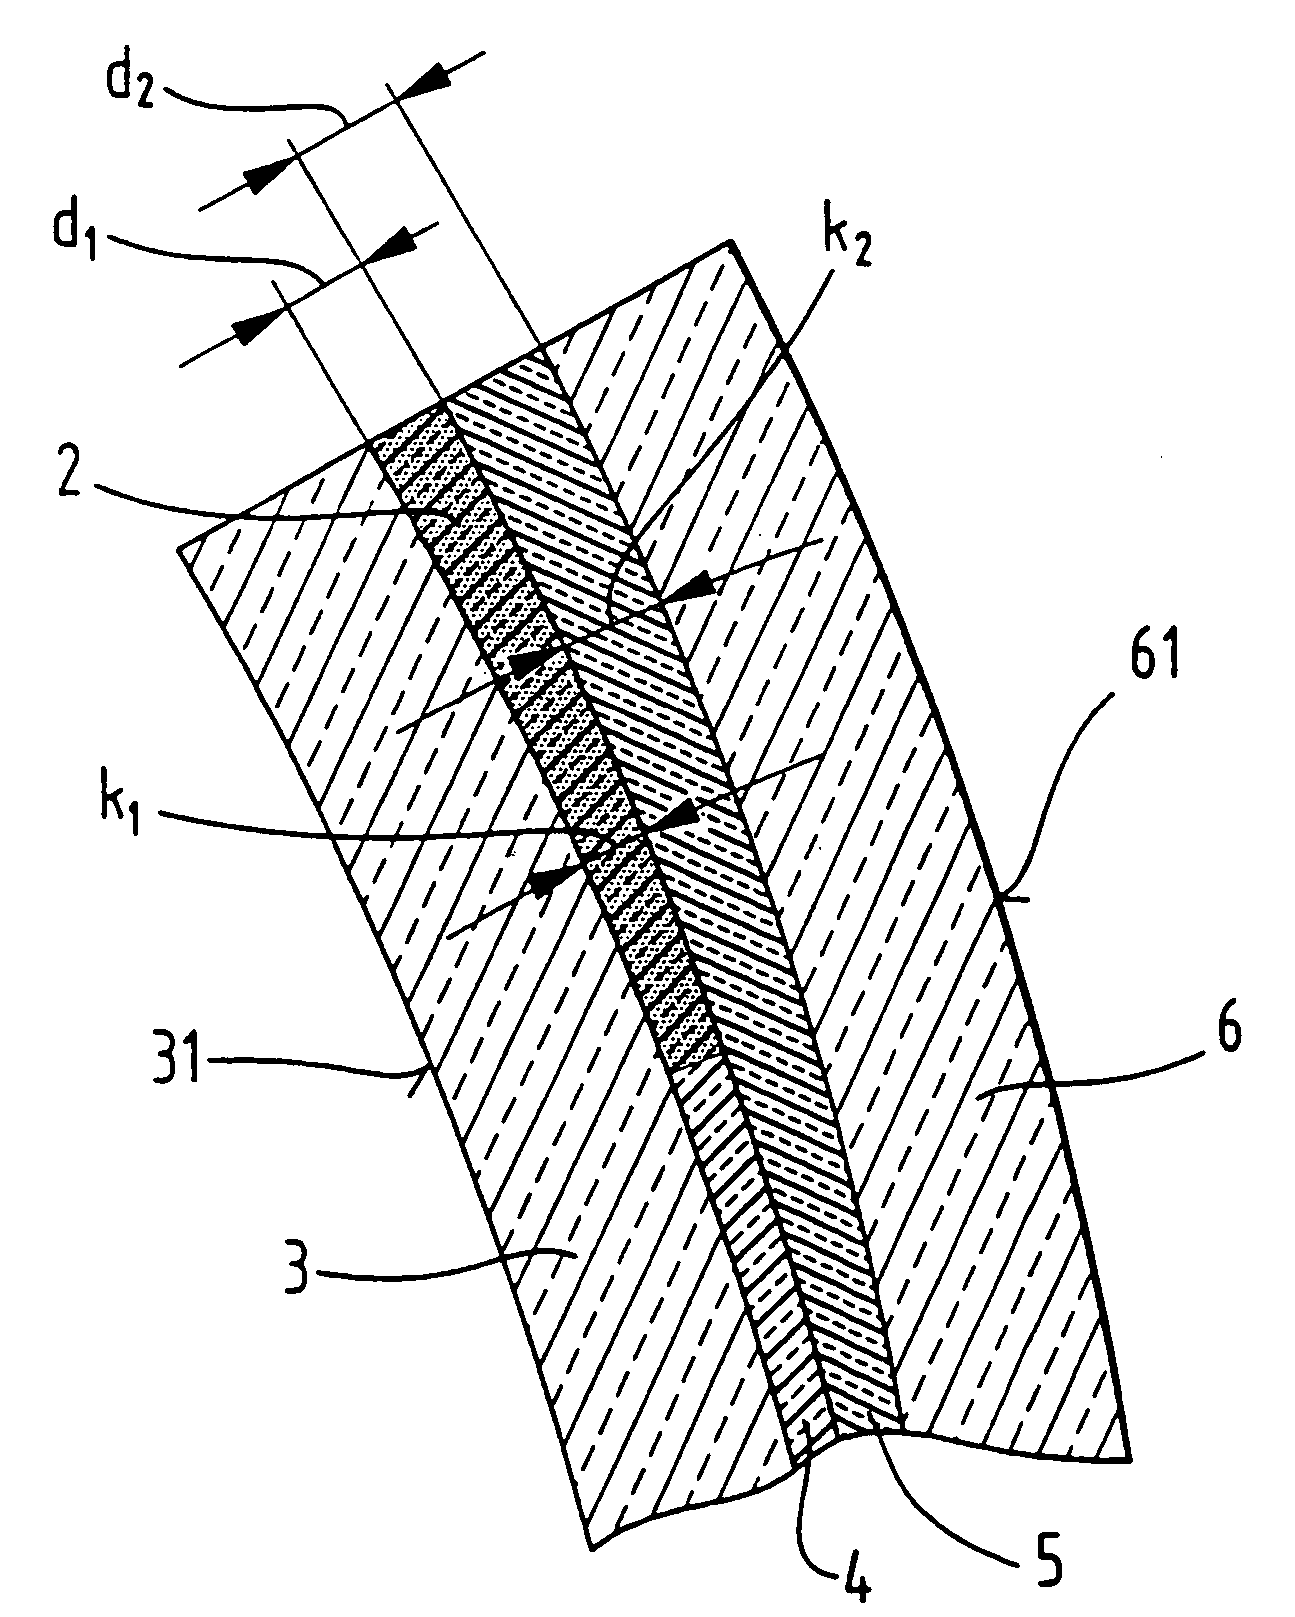 Laminated glass windscreen intended to be used at the same time as a HUD system reflector